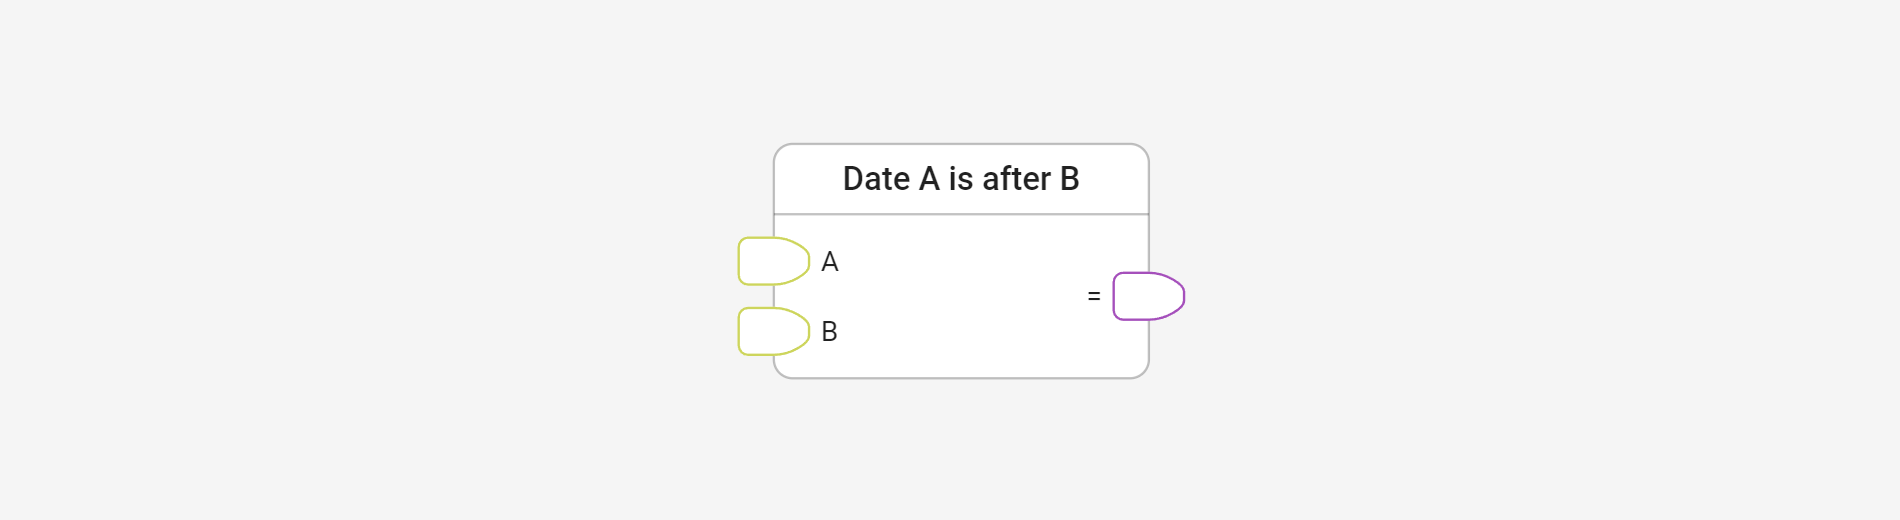 Check date using Date A is after B